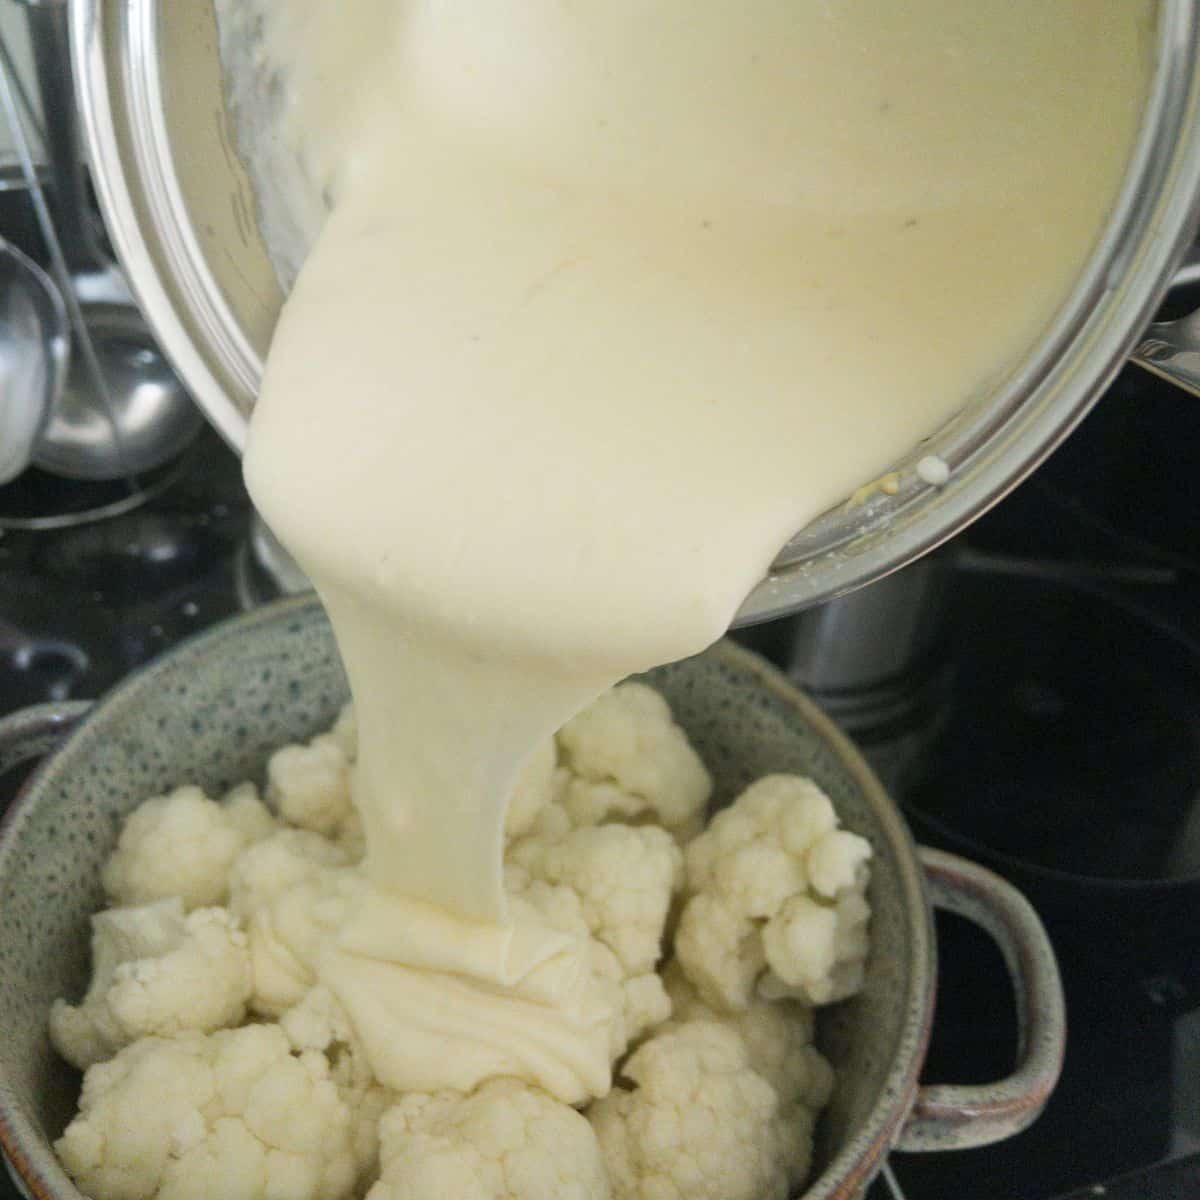 Cheese sauce being poured from a saucepan into a casserole dish full of cauliflower.